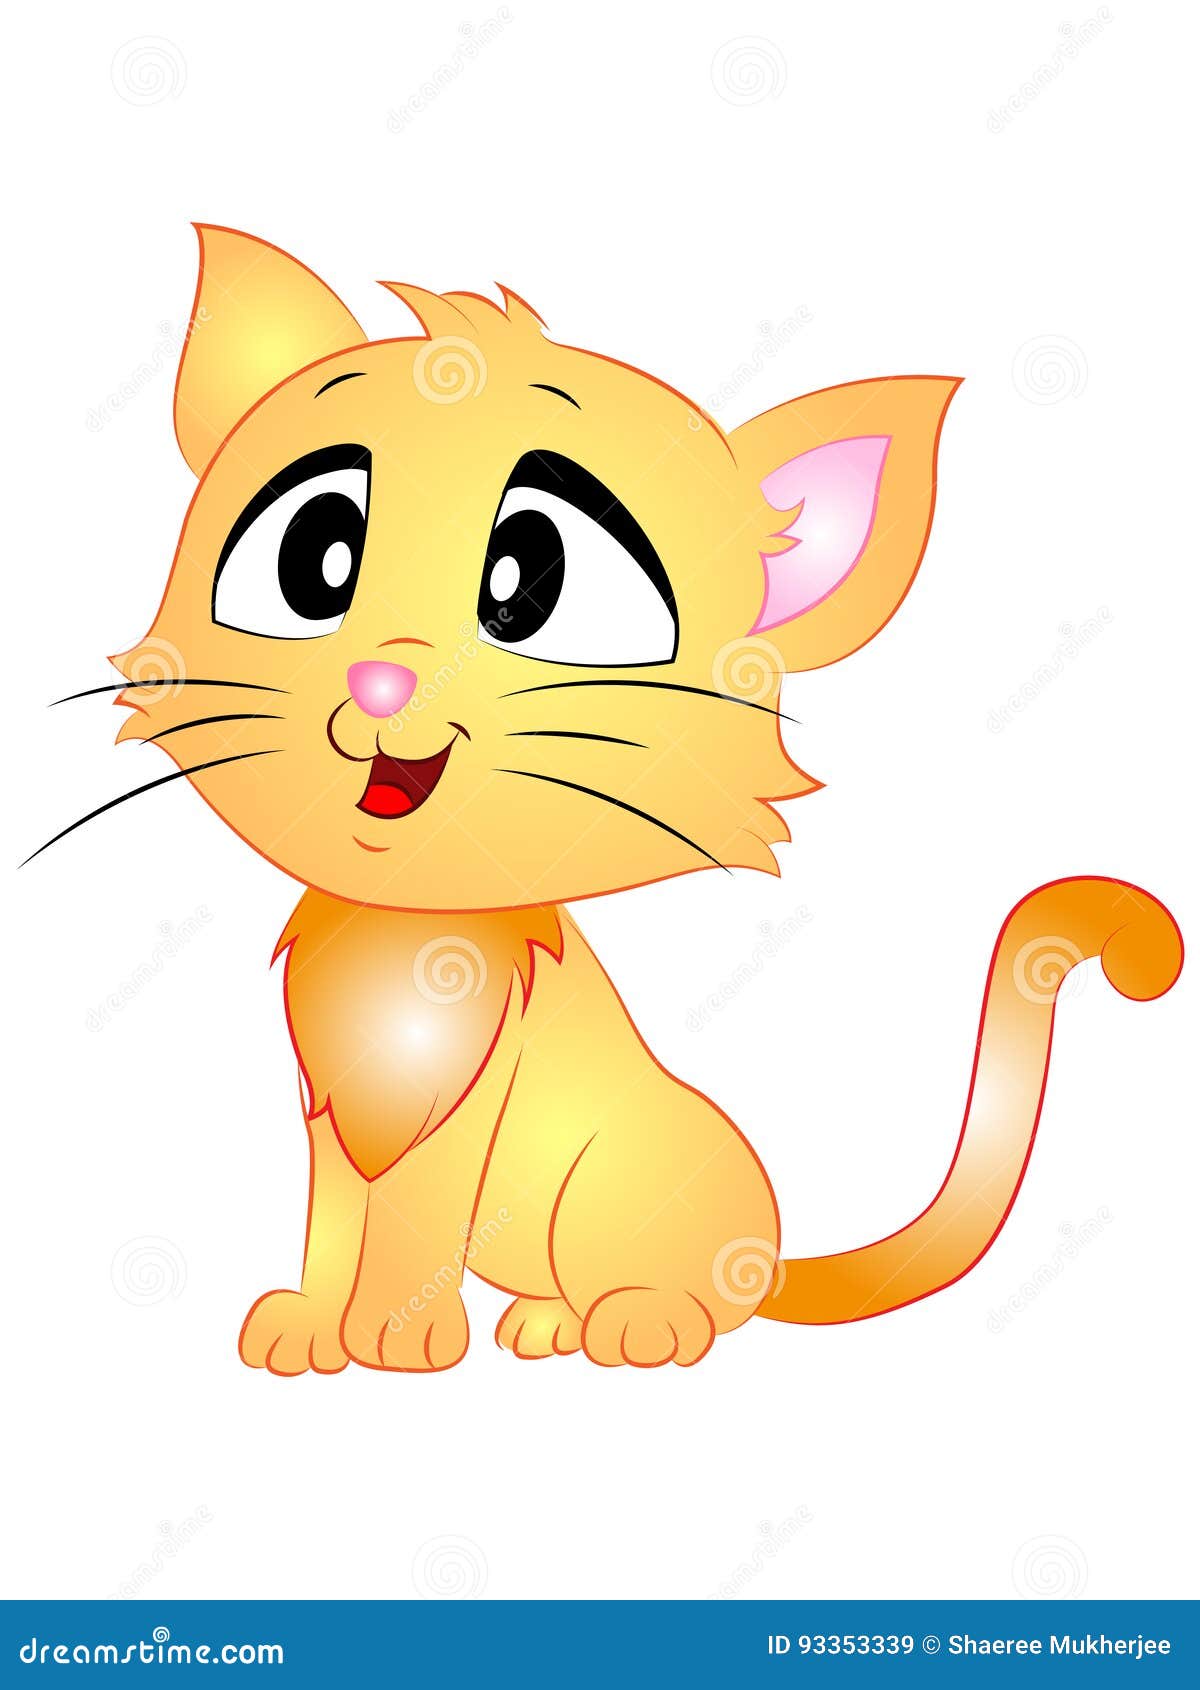 Cartoon Vector Cat Sitting Side View Stock Vector - Illustration of sitting,  meow: 93353339